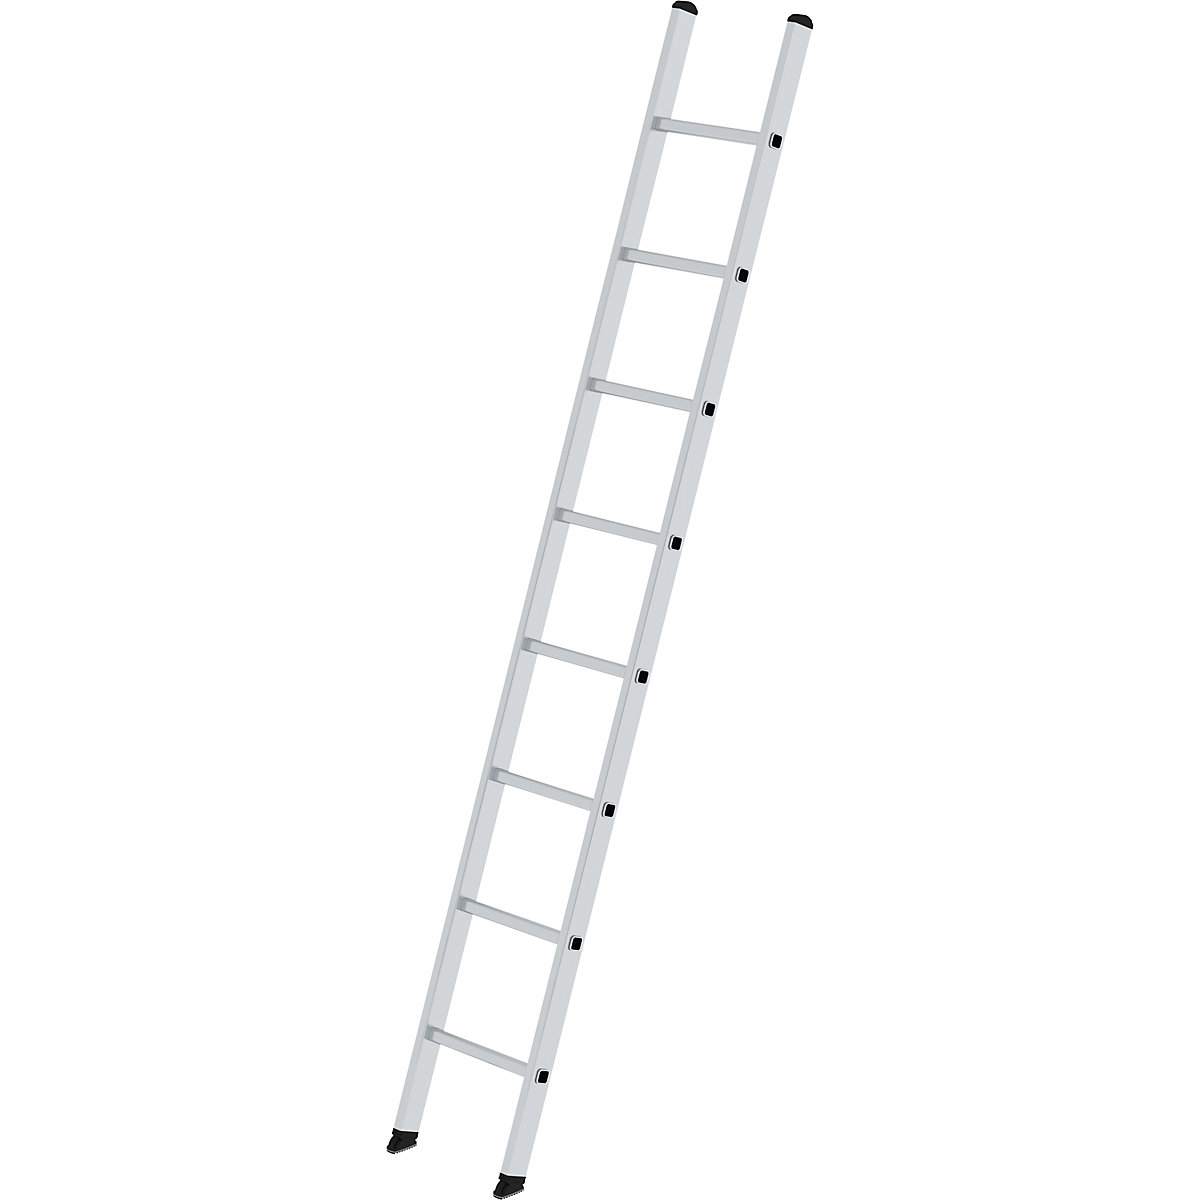 Lean-to rung ladder without beam – MUNK, width 350 mm, 8 rungs-1